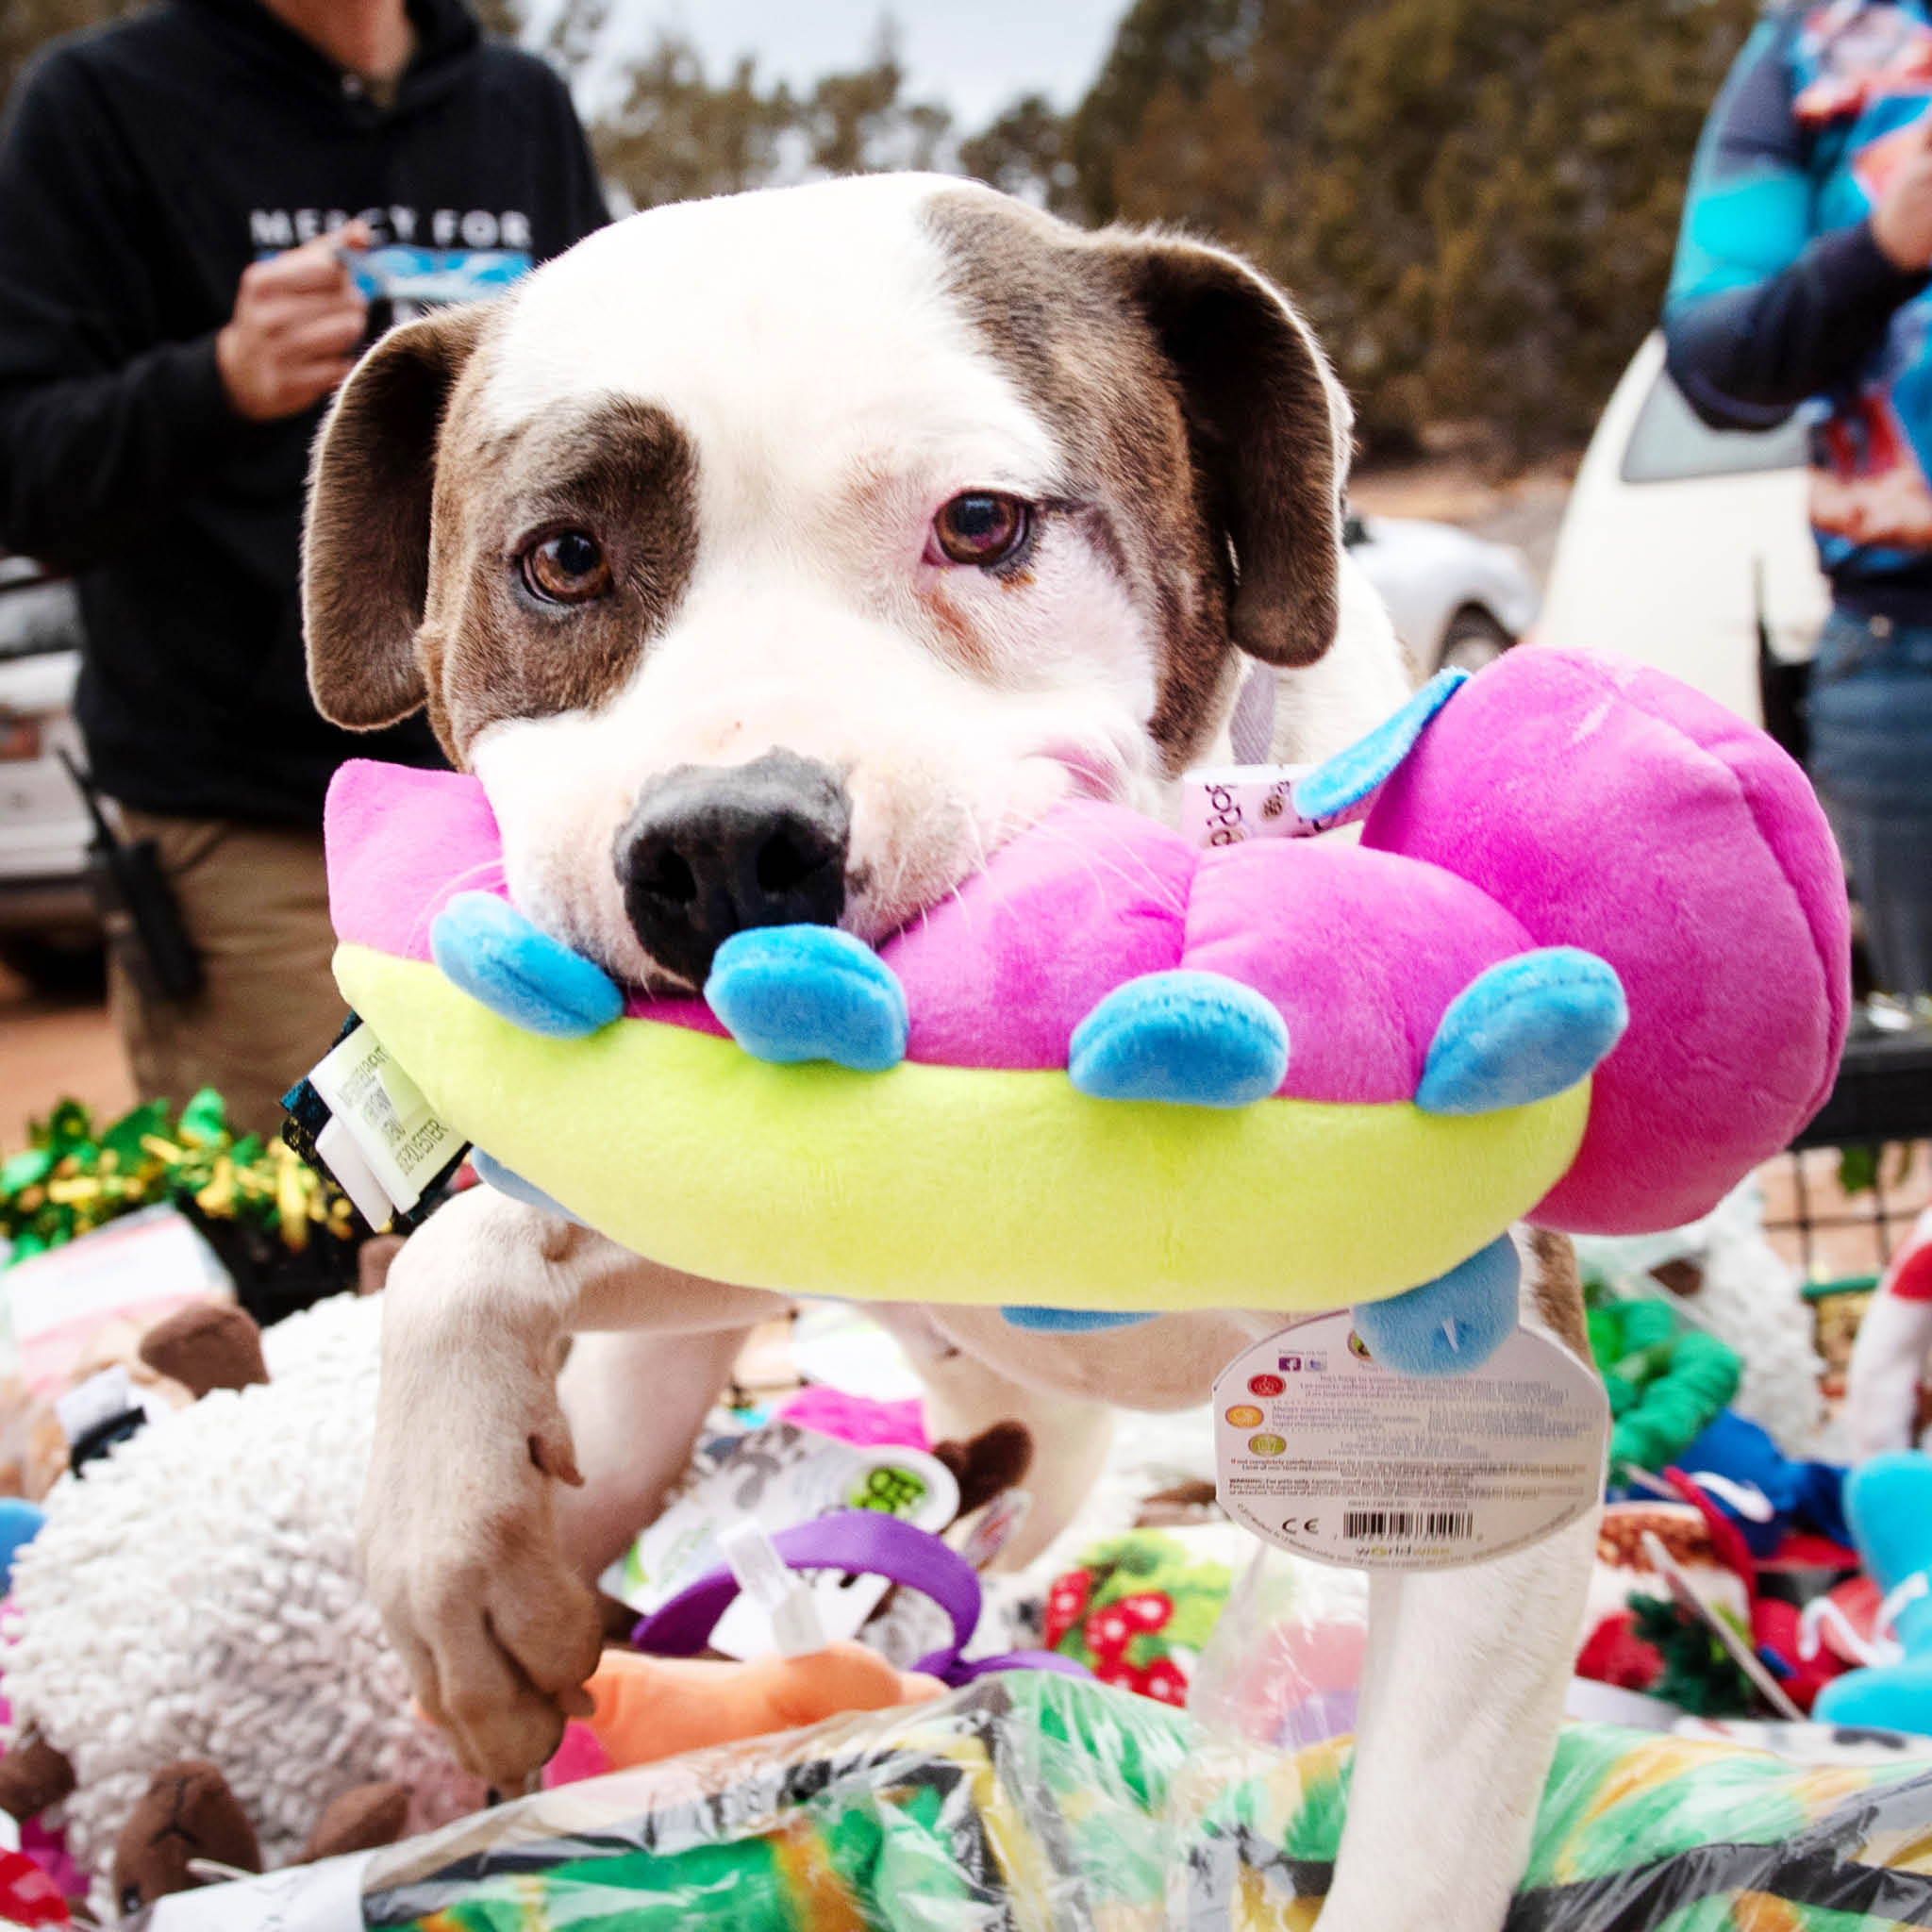 What Are The Benefits Of Dog Enrichment Toys In League City, TX? - Safari  Veterinary Care Centers